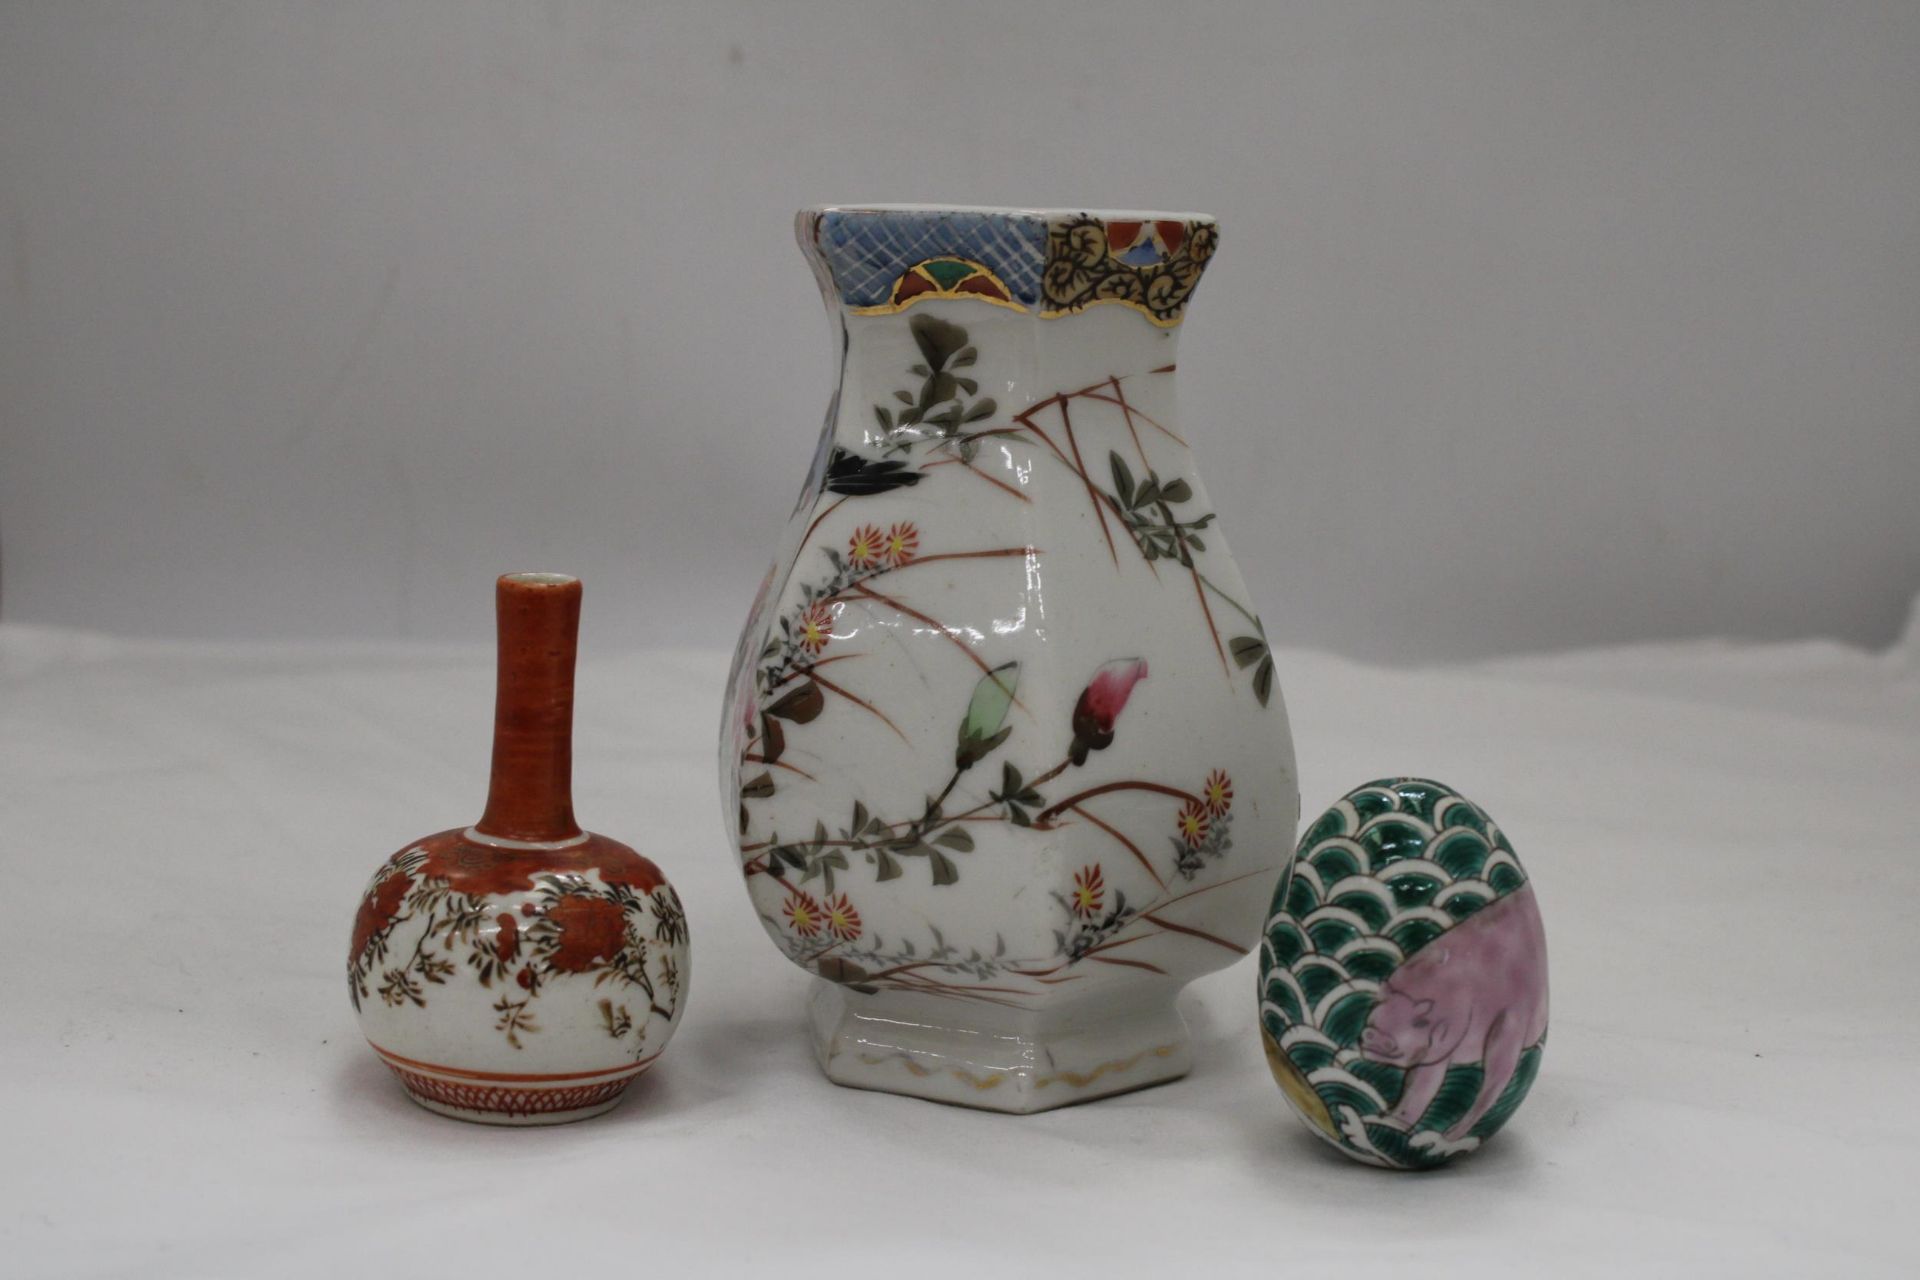 AN ORIENTAL HEXAGONAL VASE, SMALLER ORIENTAL VASE AND DECORATED EGG - Image 4 of 6